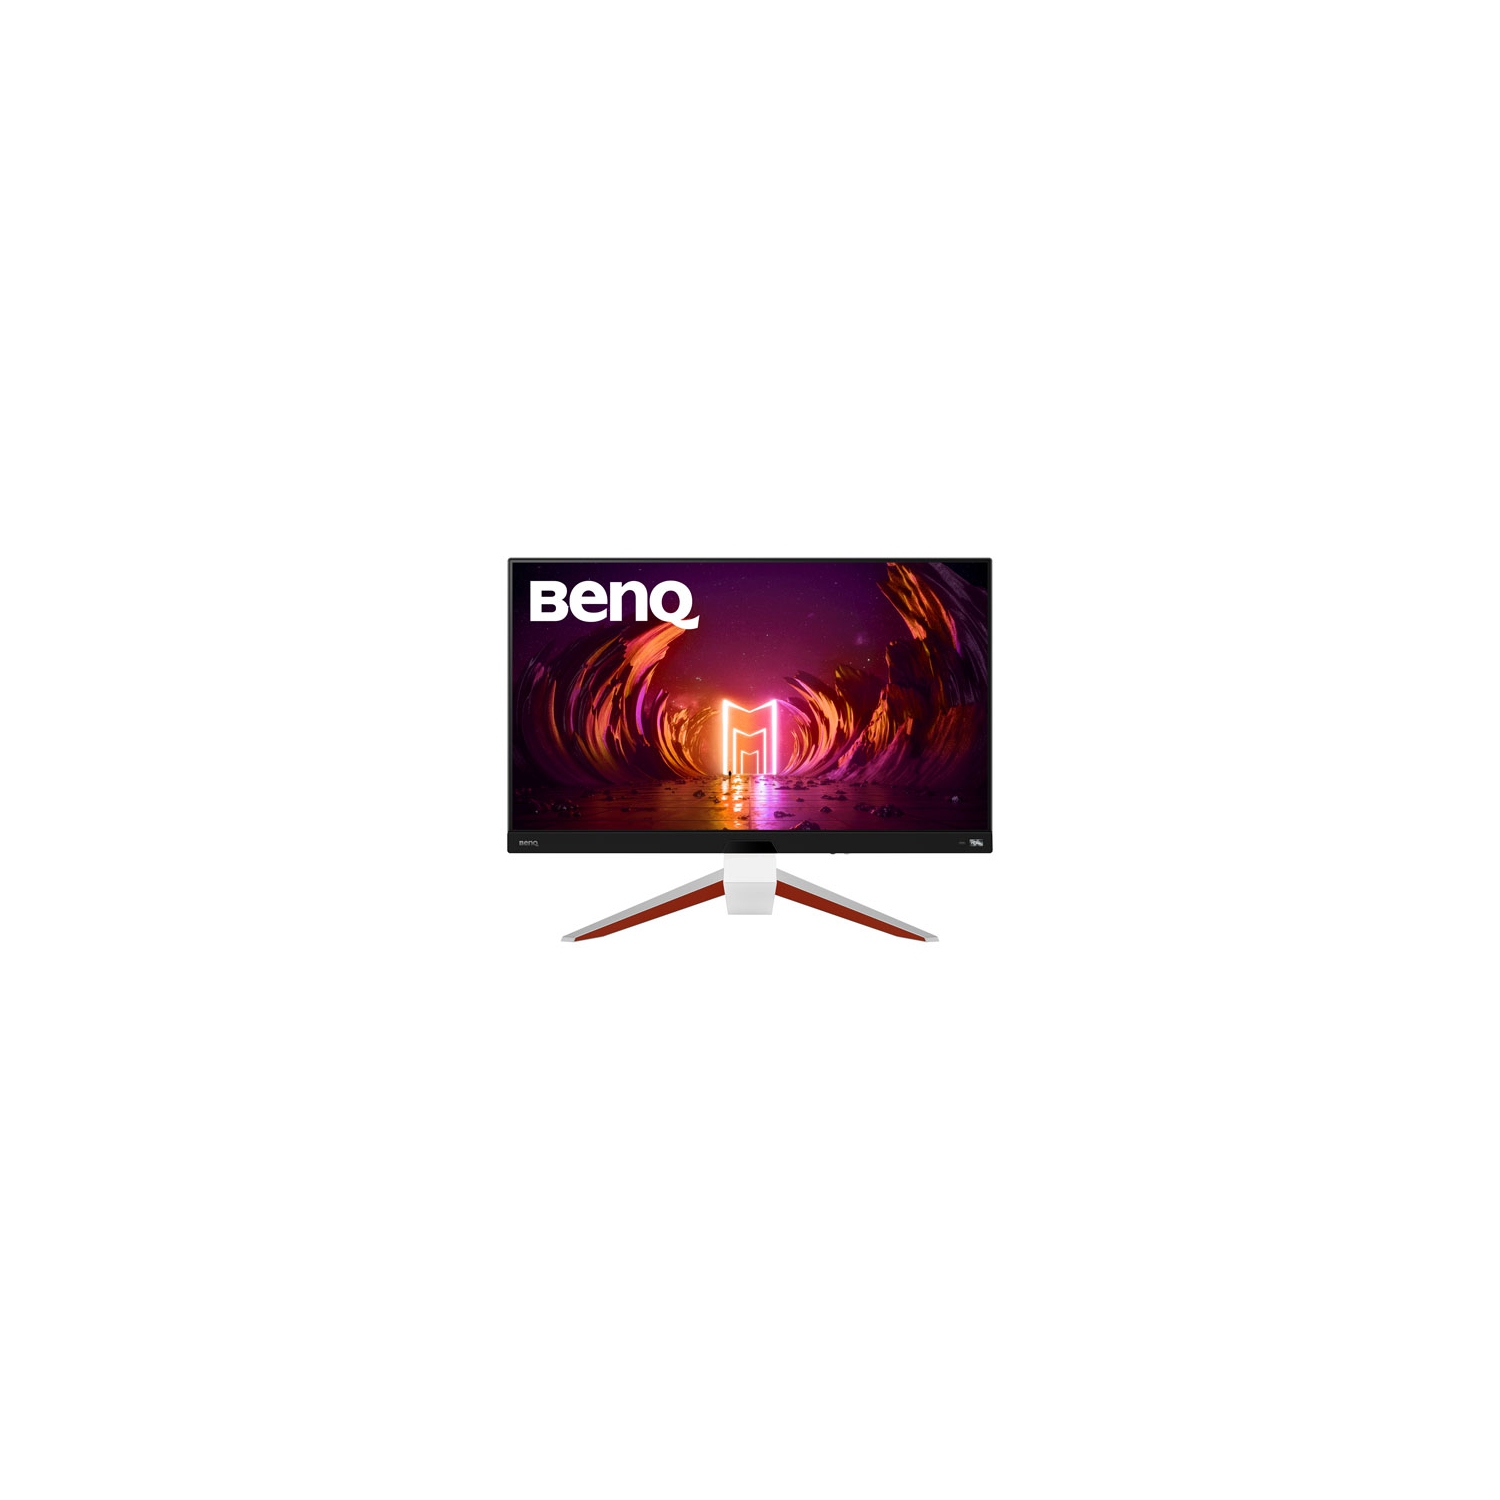 Refurbished (Excellent) - BenQ 27" 4K Ultra HD 144Hz 1ms GTG IPS LCD FreeSync Gaming Monitor - White